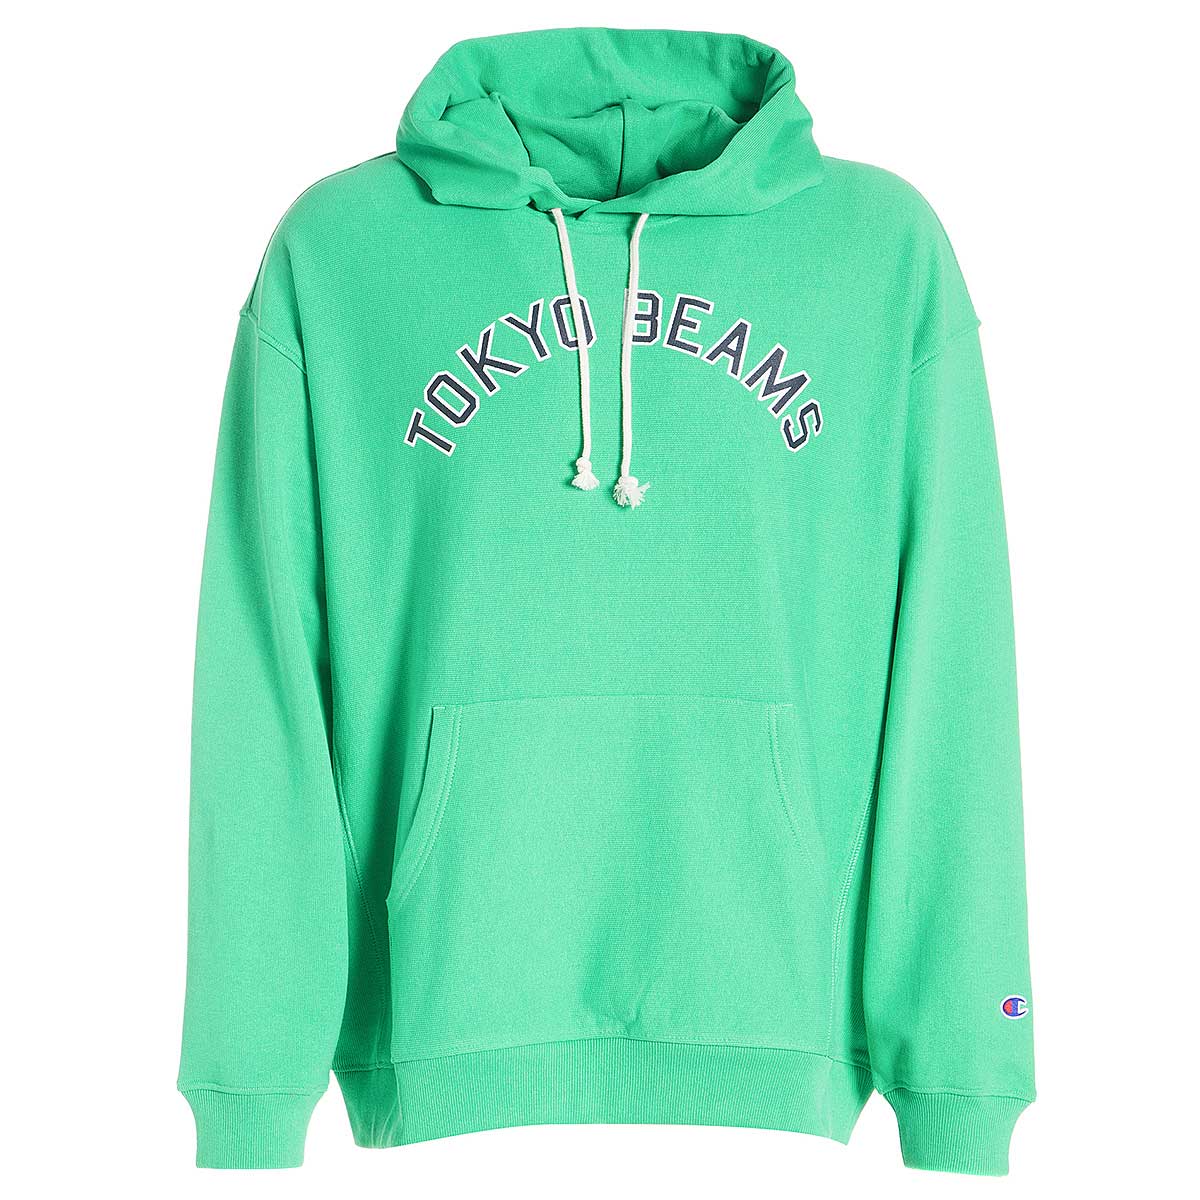 x BEAMS Hoody for 0.0 on